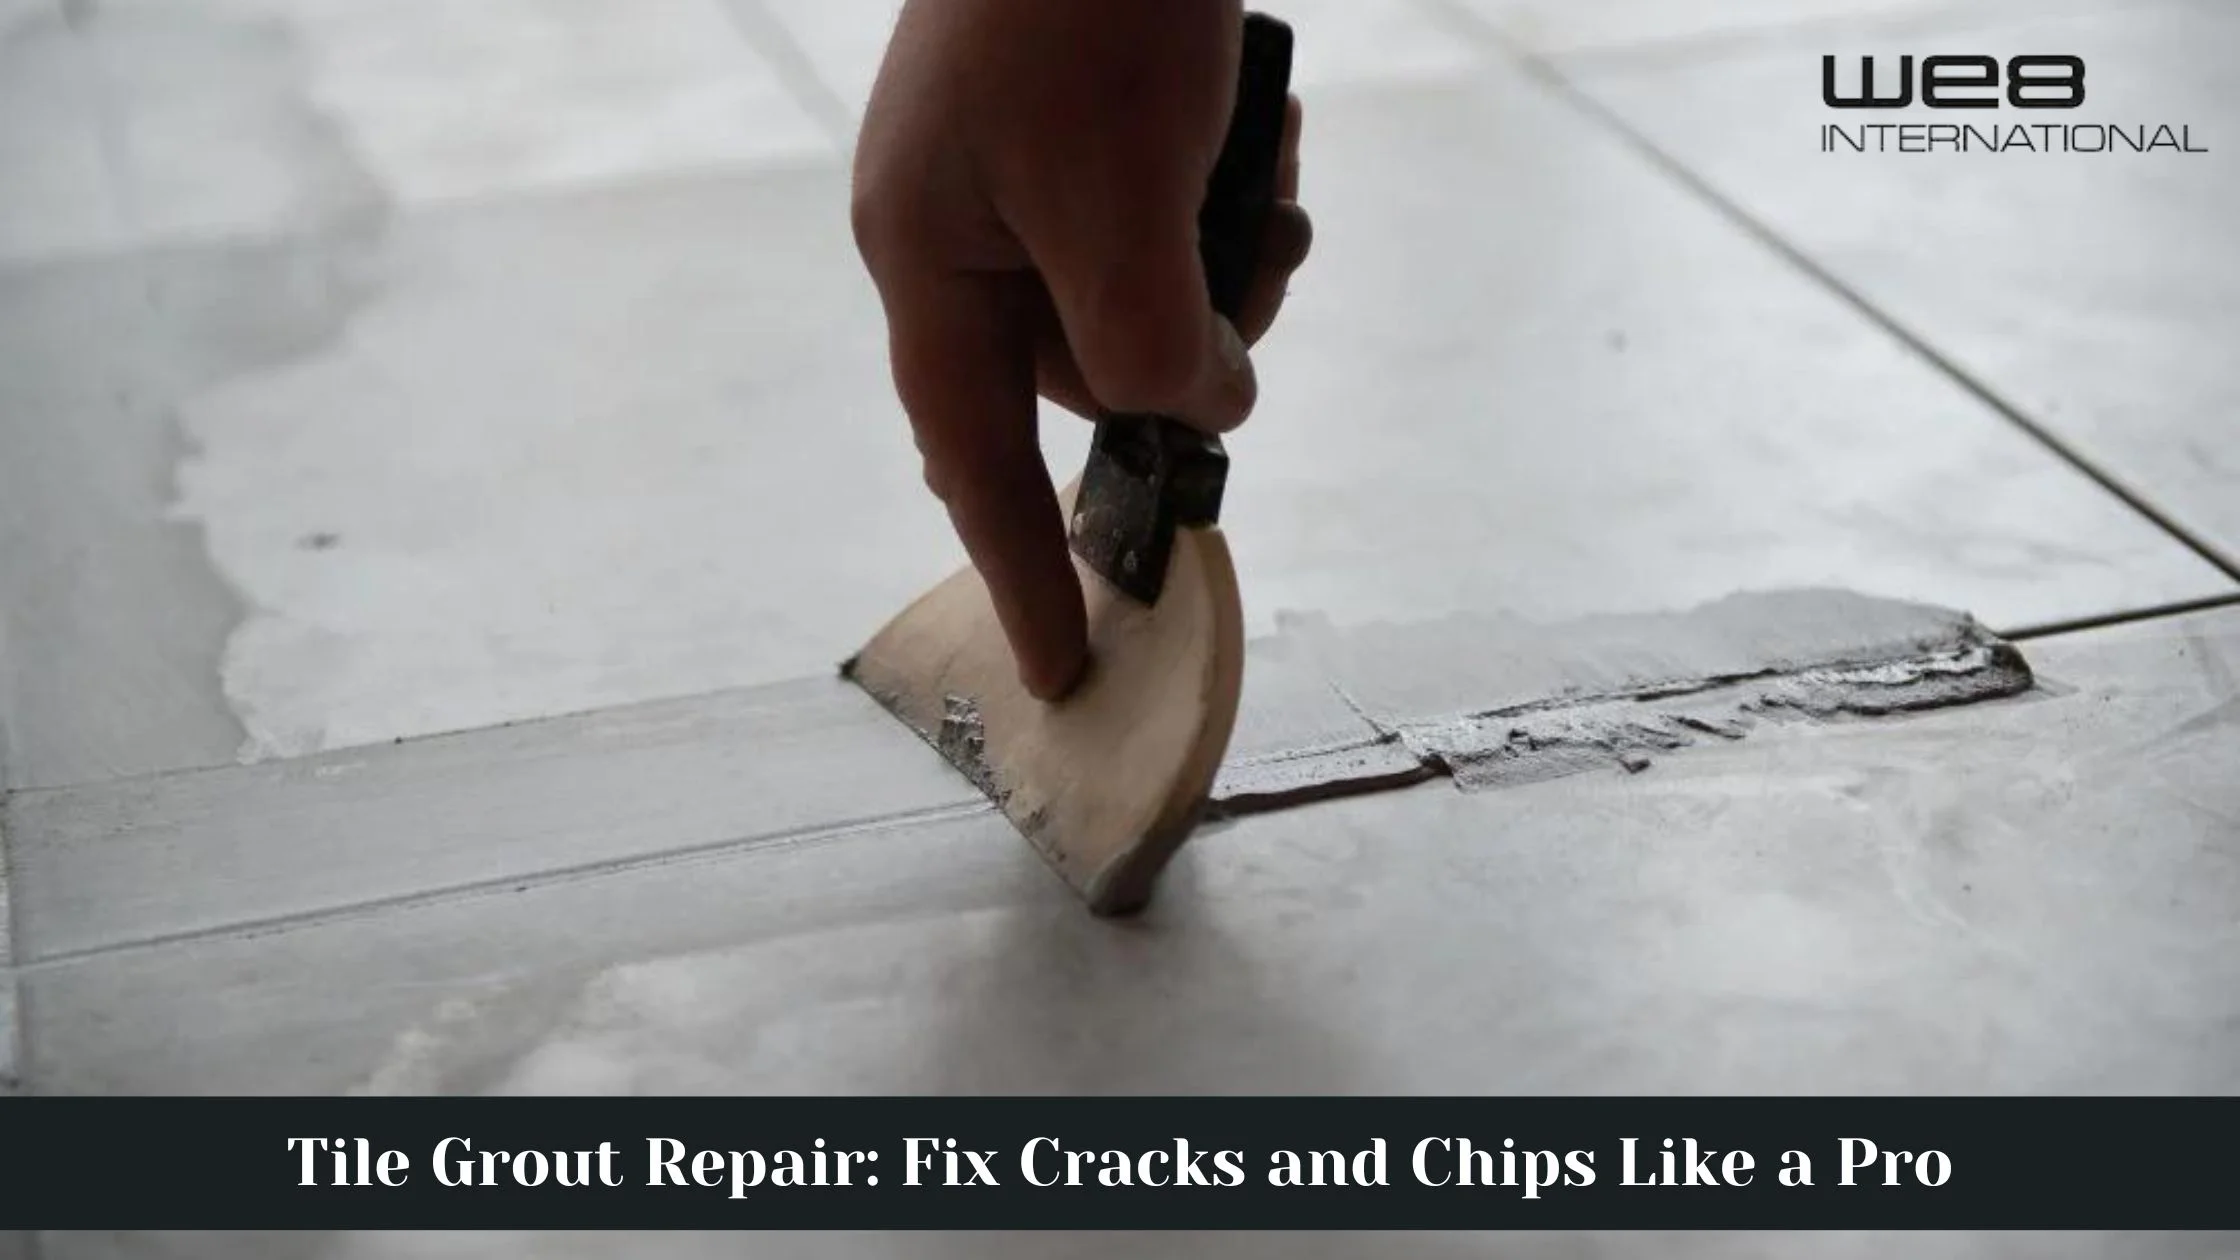 Tile Grout Repair: Fix Cracks and Chips Like a Pro